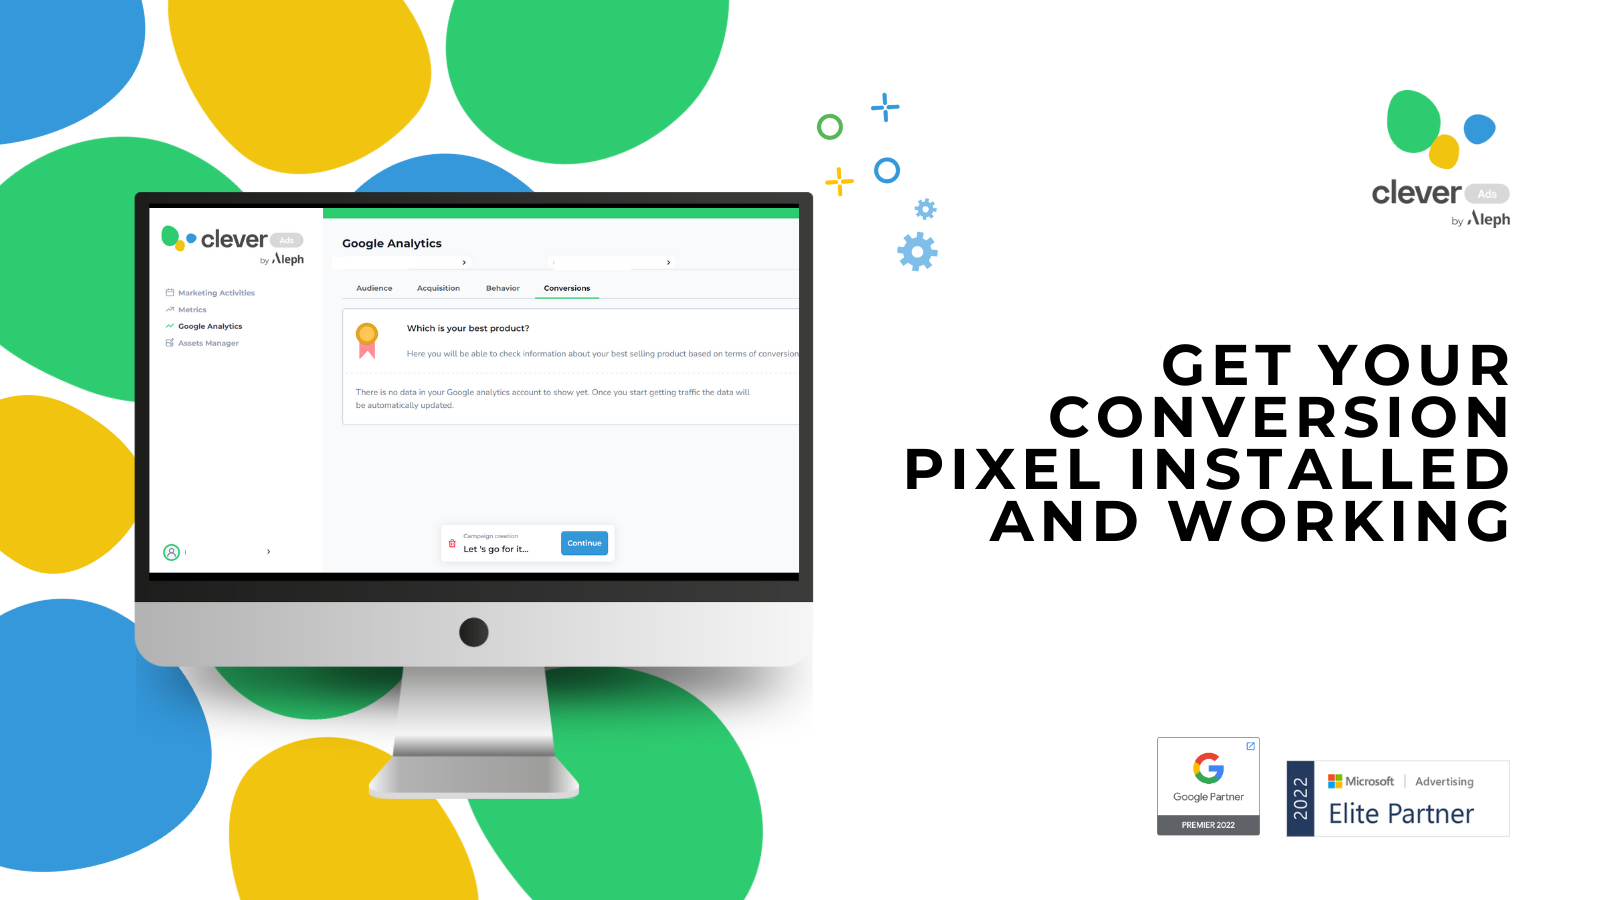 Get your conversion pixel installed